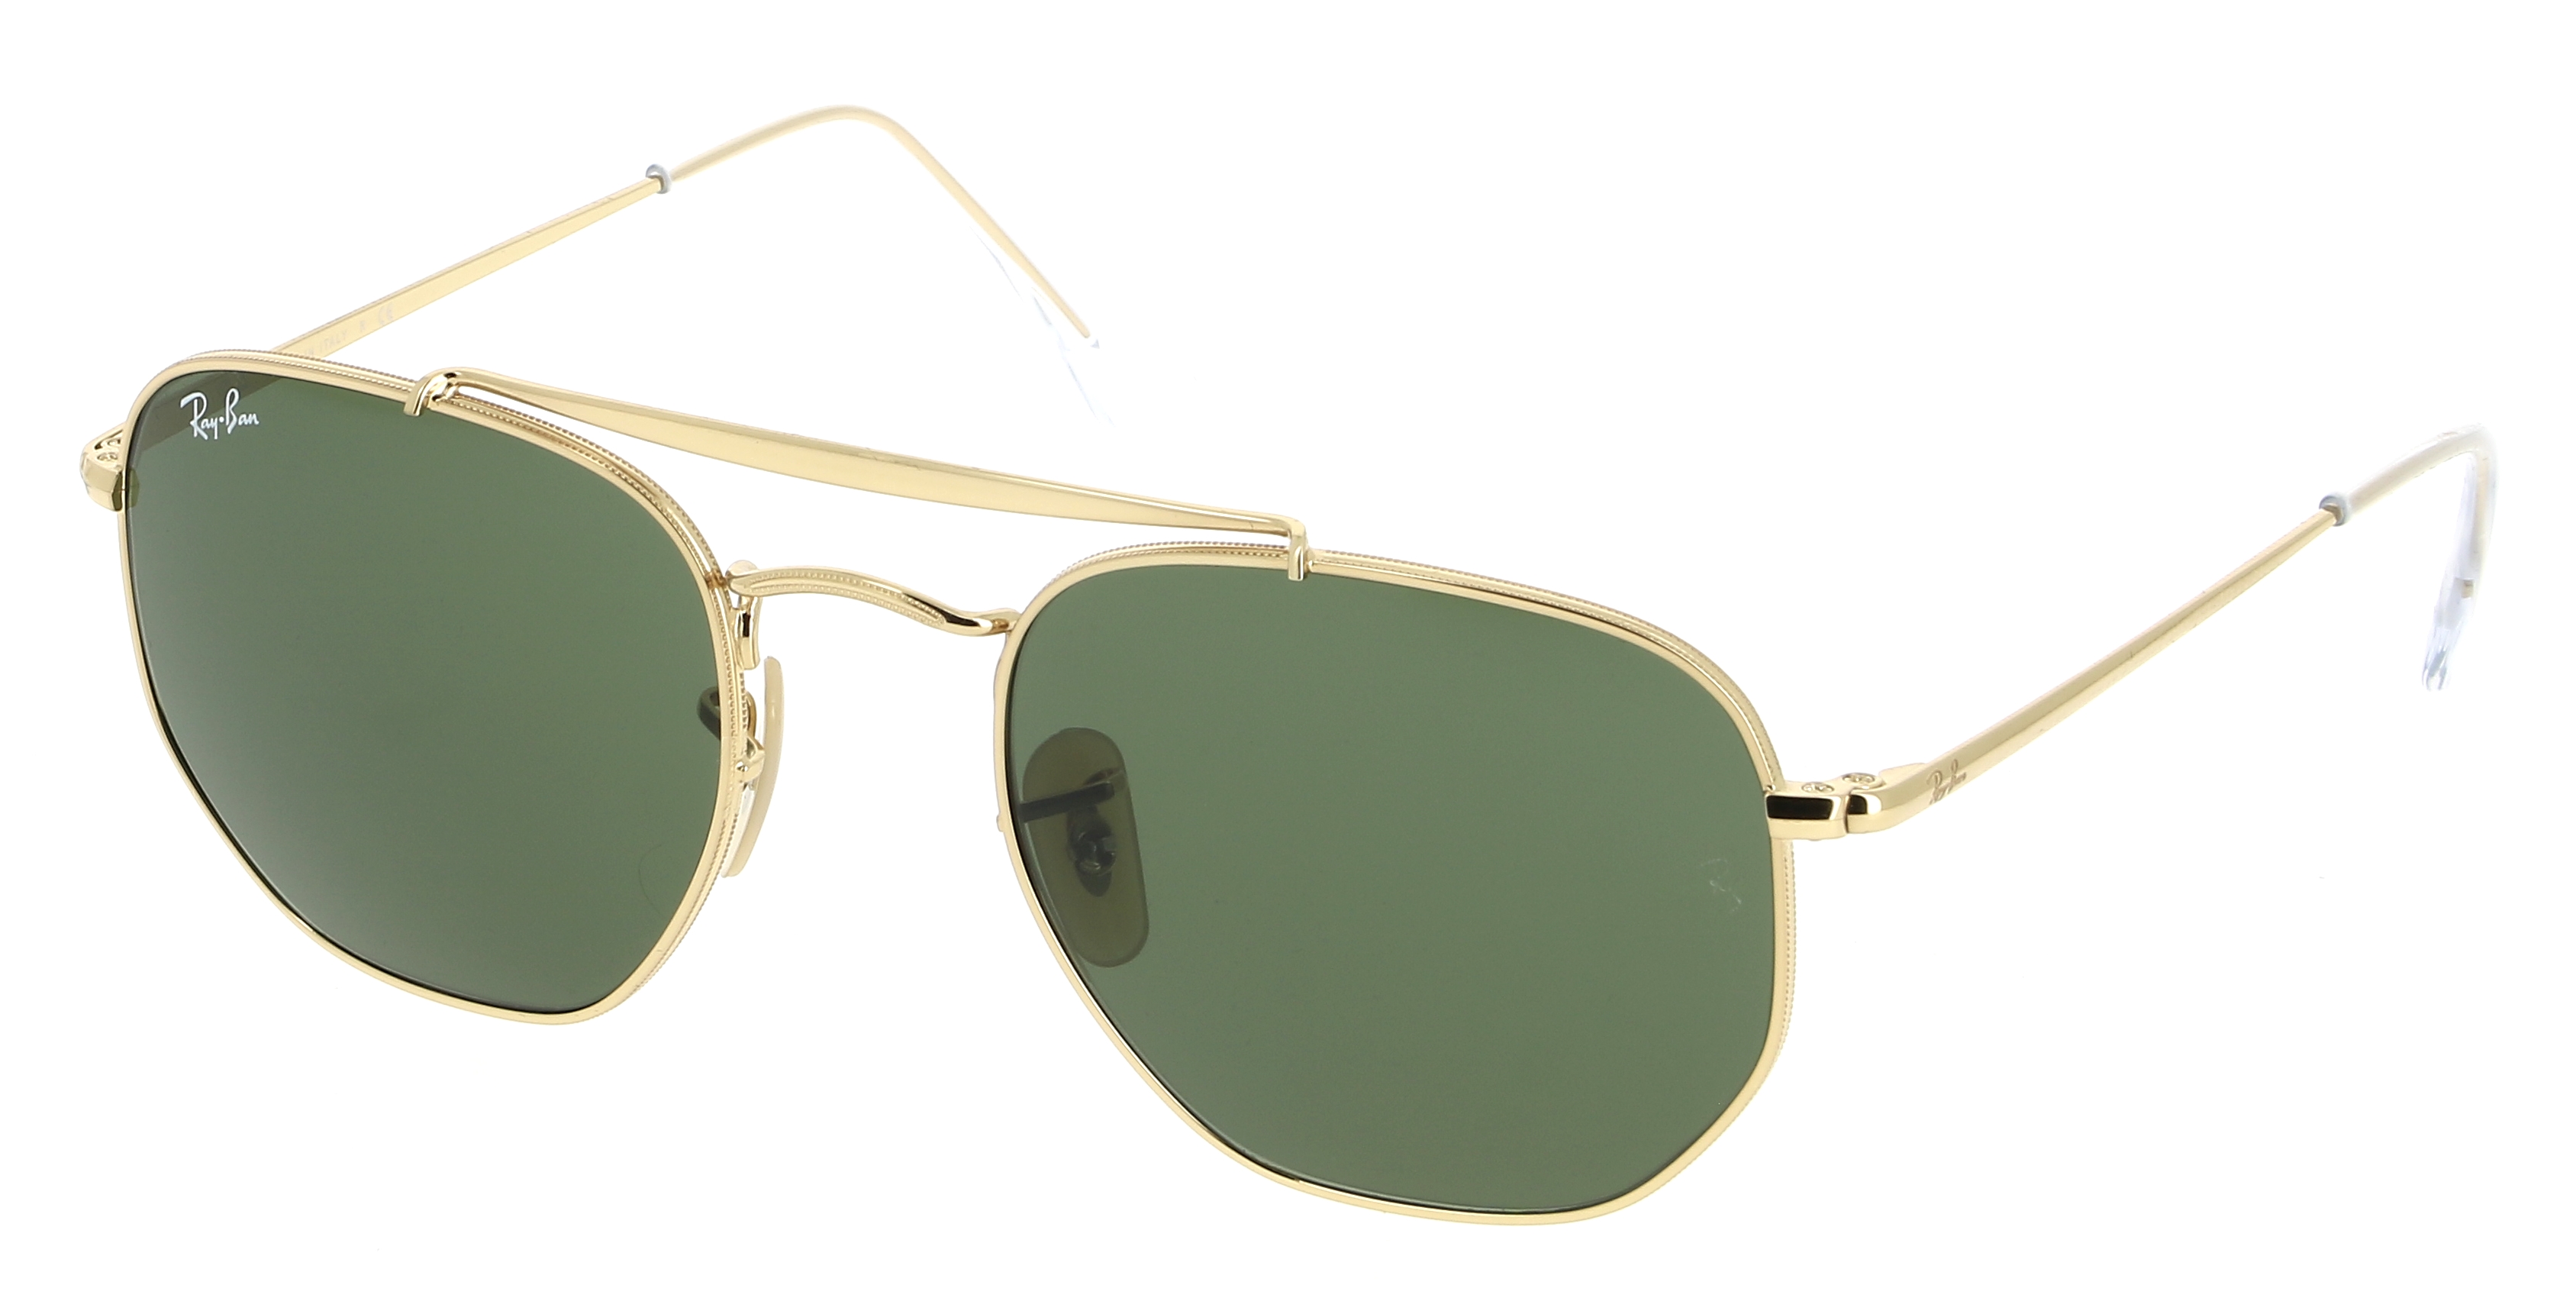 Lunettes de soleil RAY-BAN RB 3648 001 THE MARSHAL 51/21